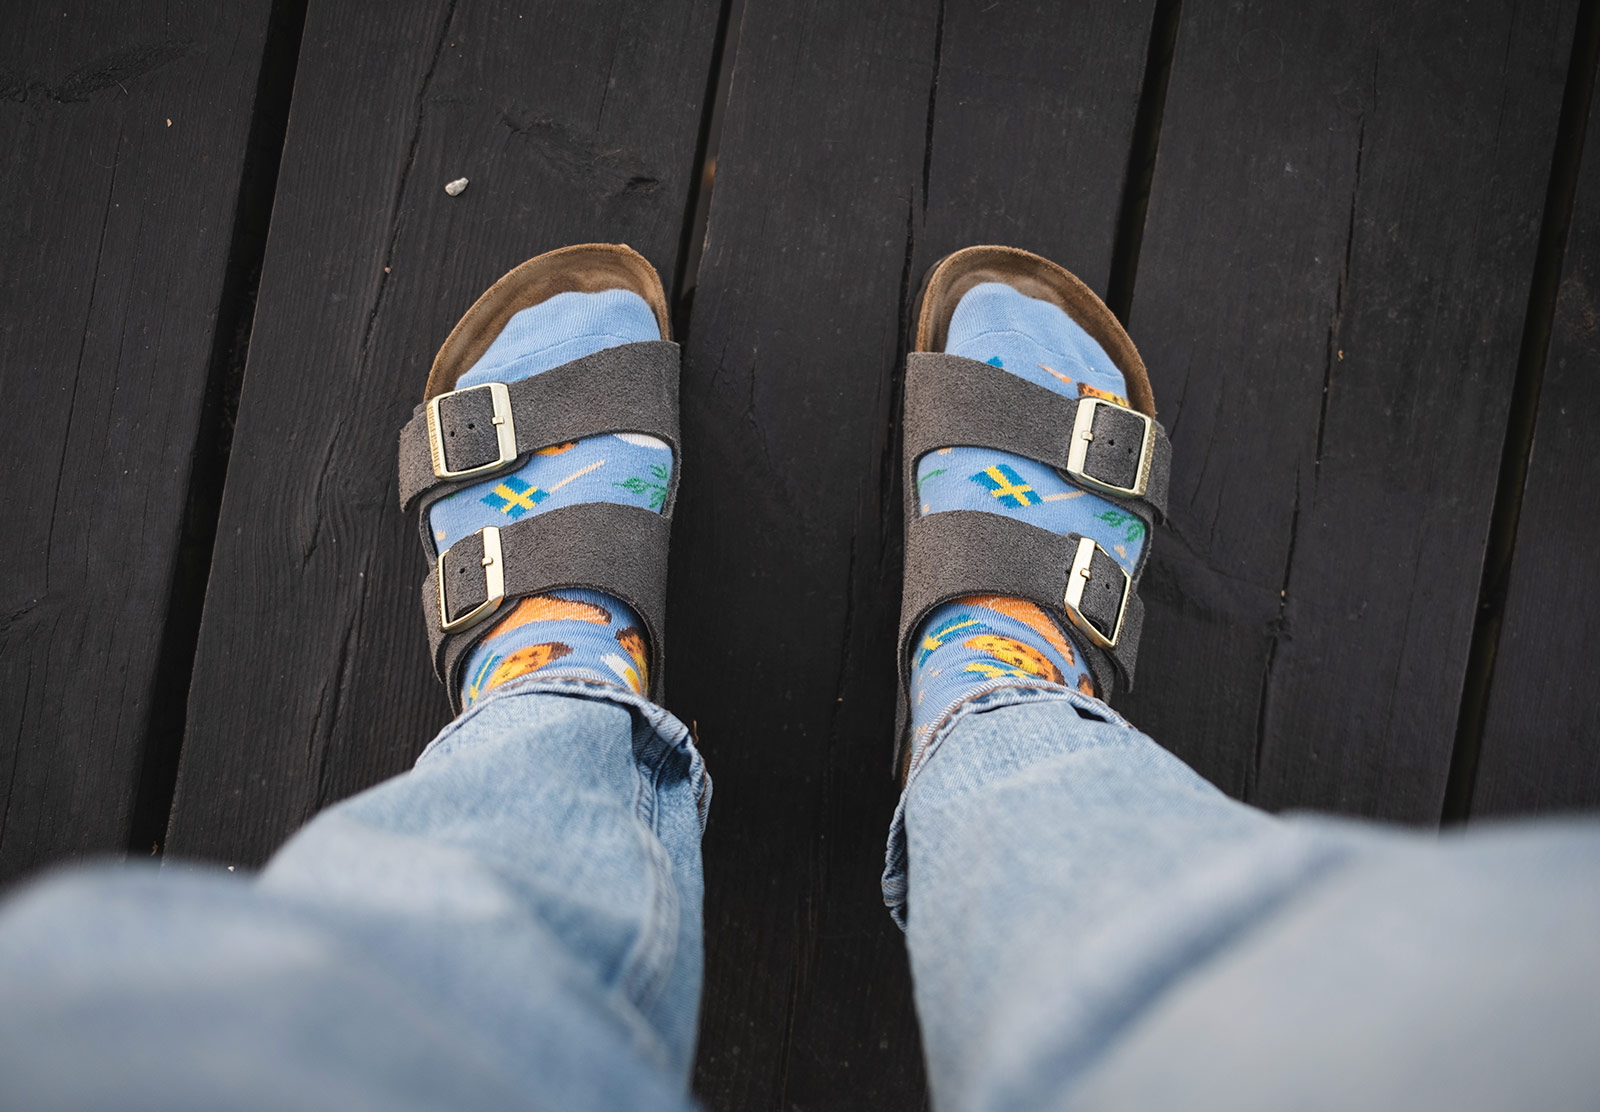 Wearing socks with sandals